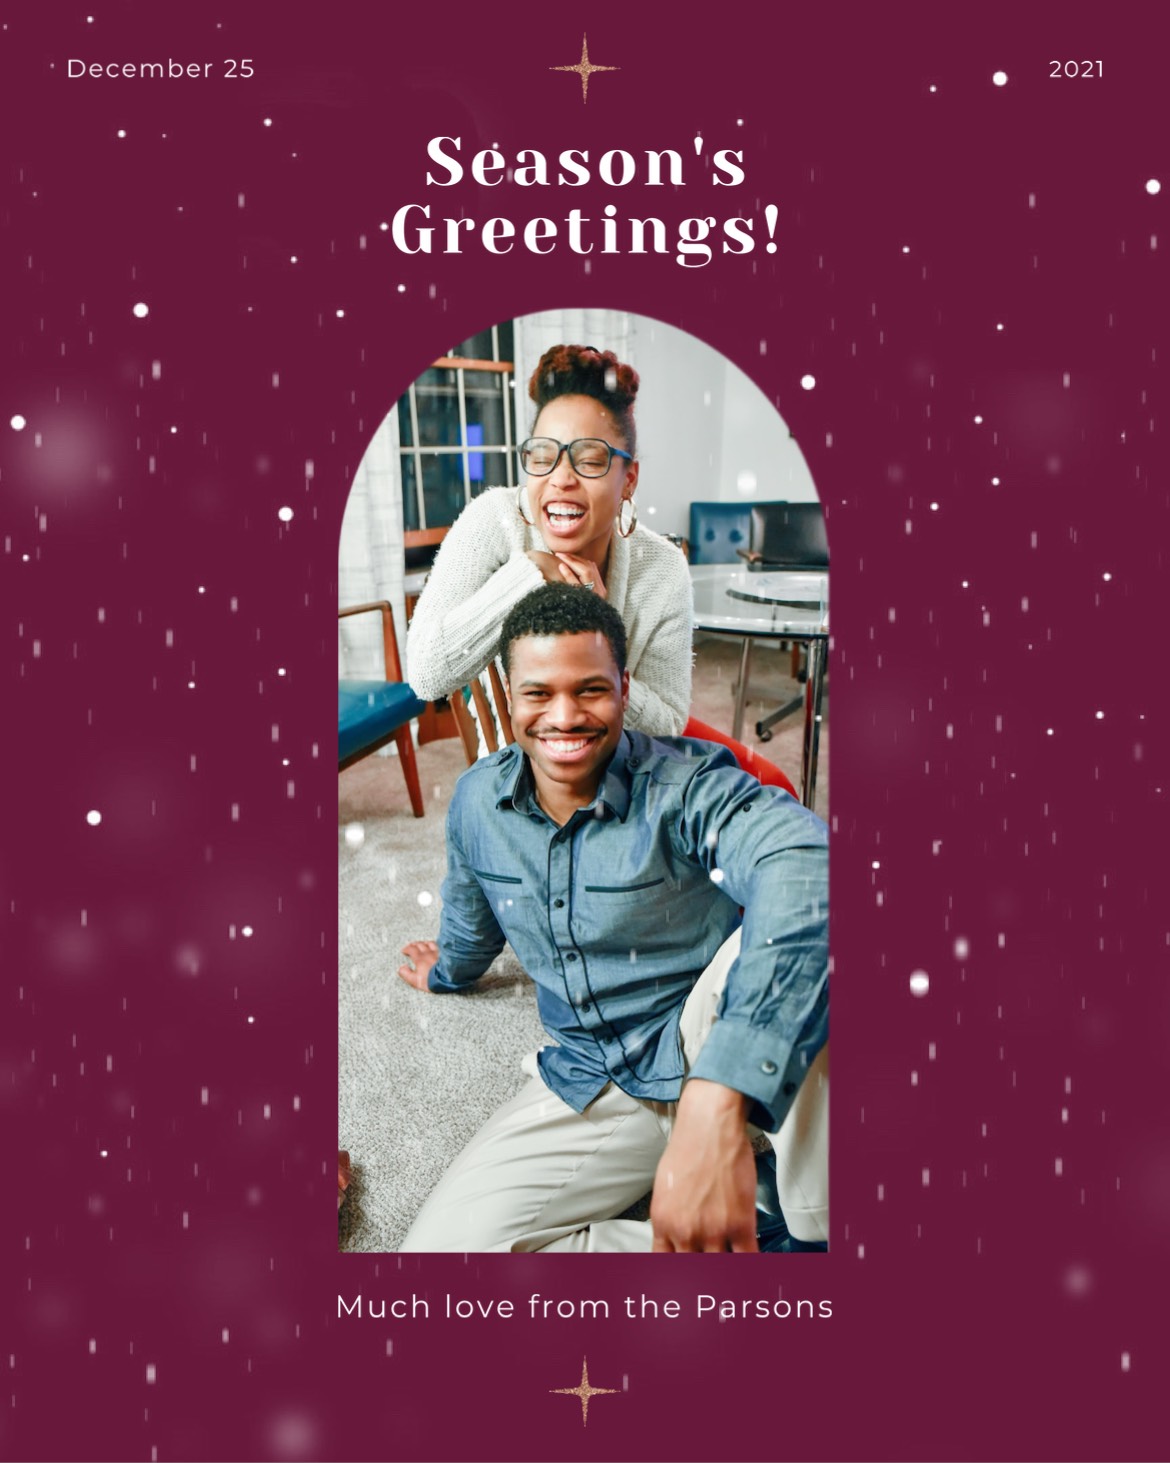 A Christmas Card With A Photo Of A Man And Woman Merry Christmas Template